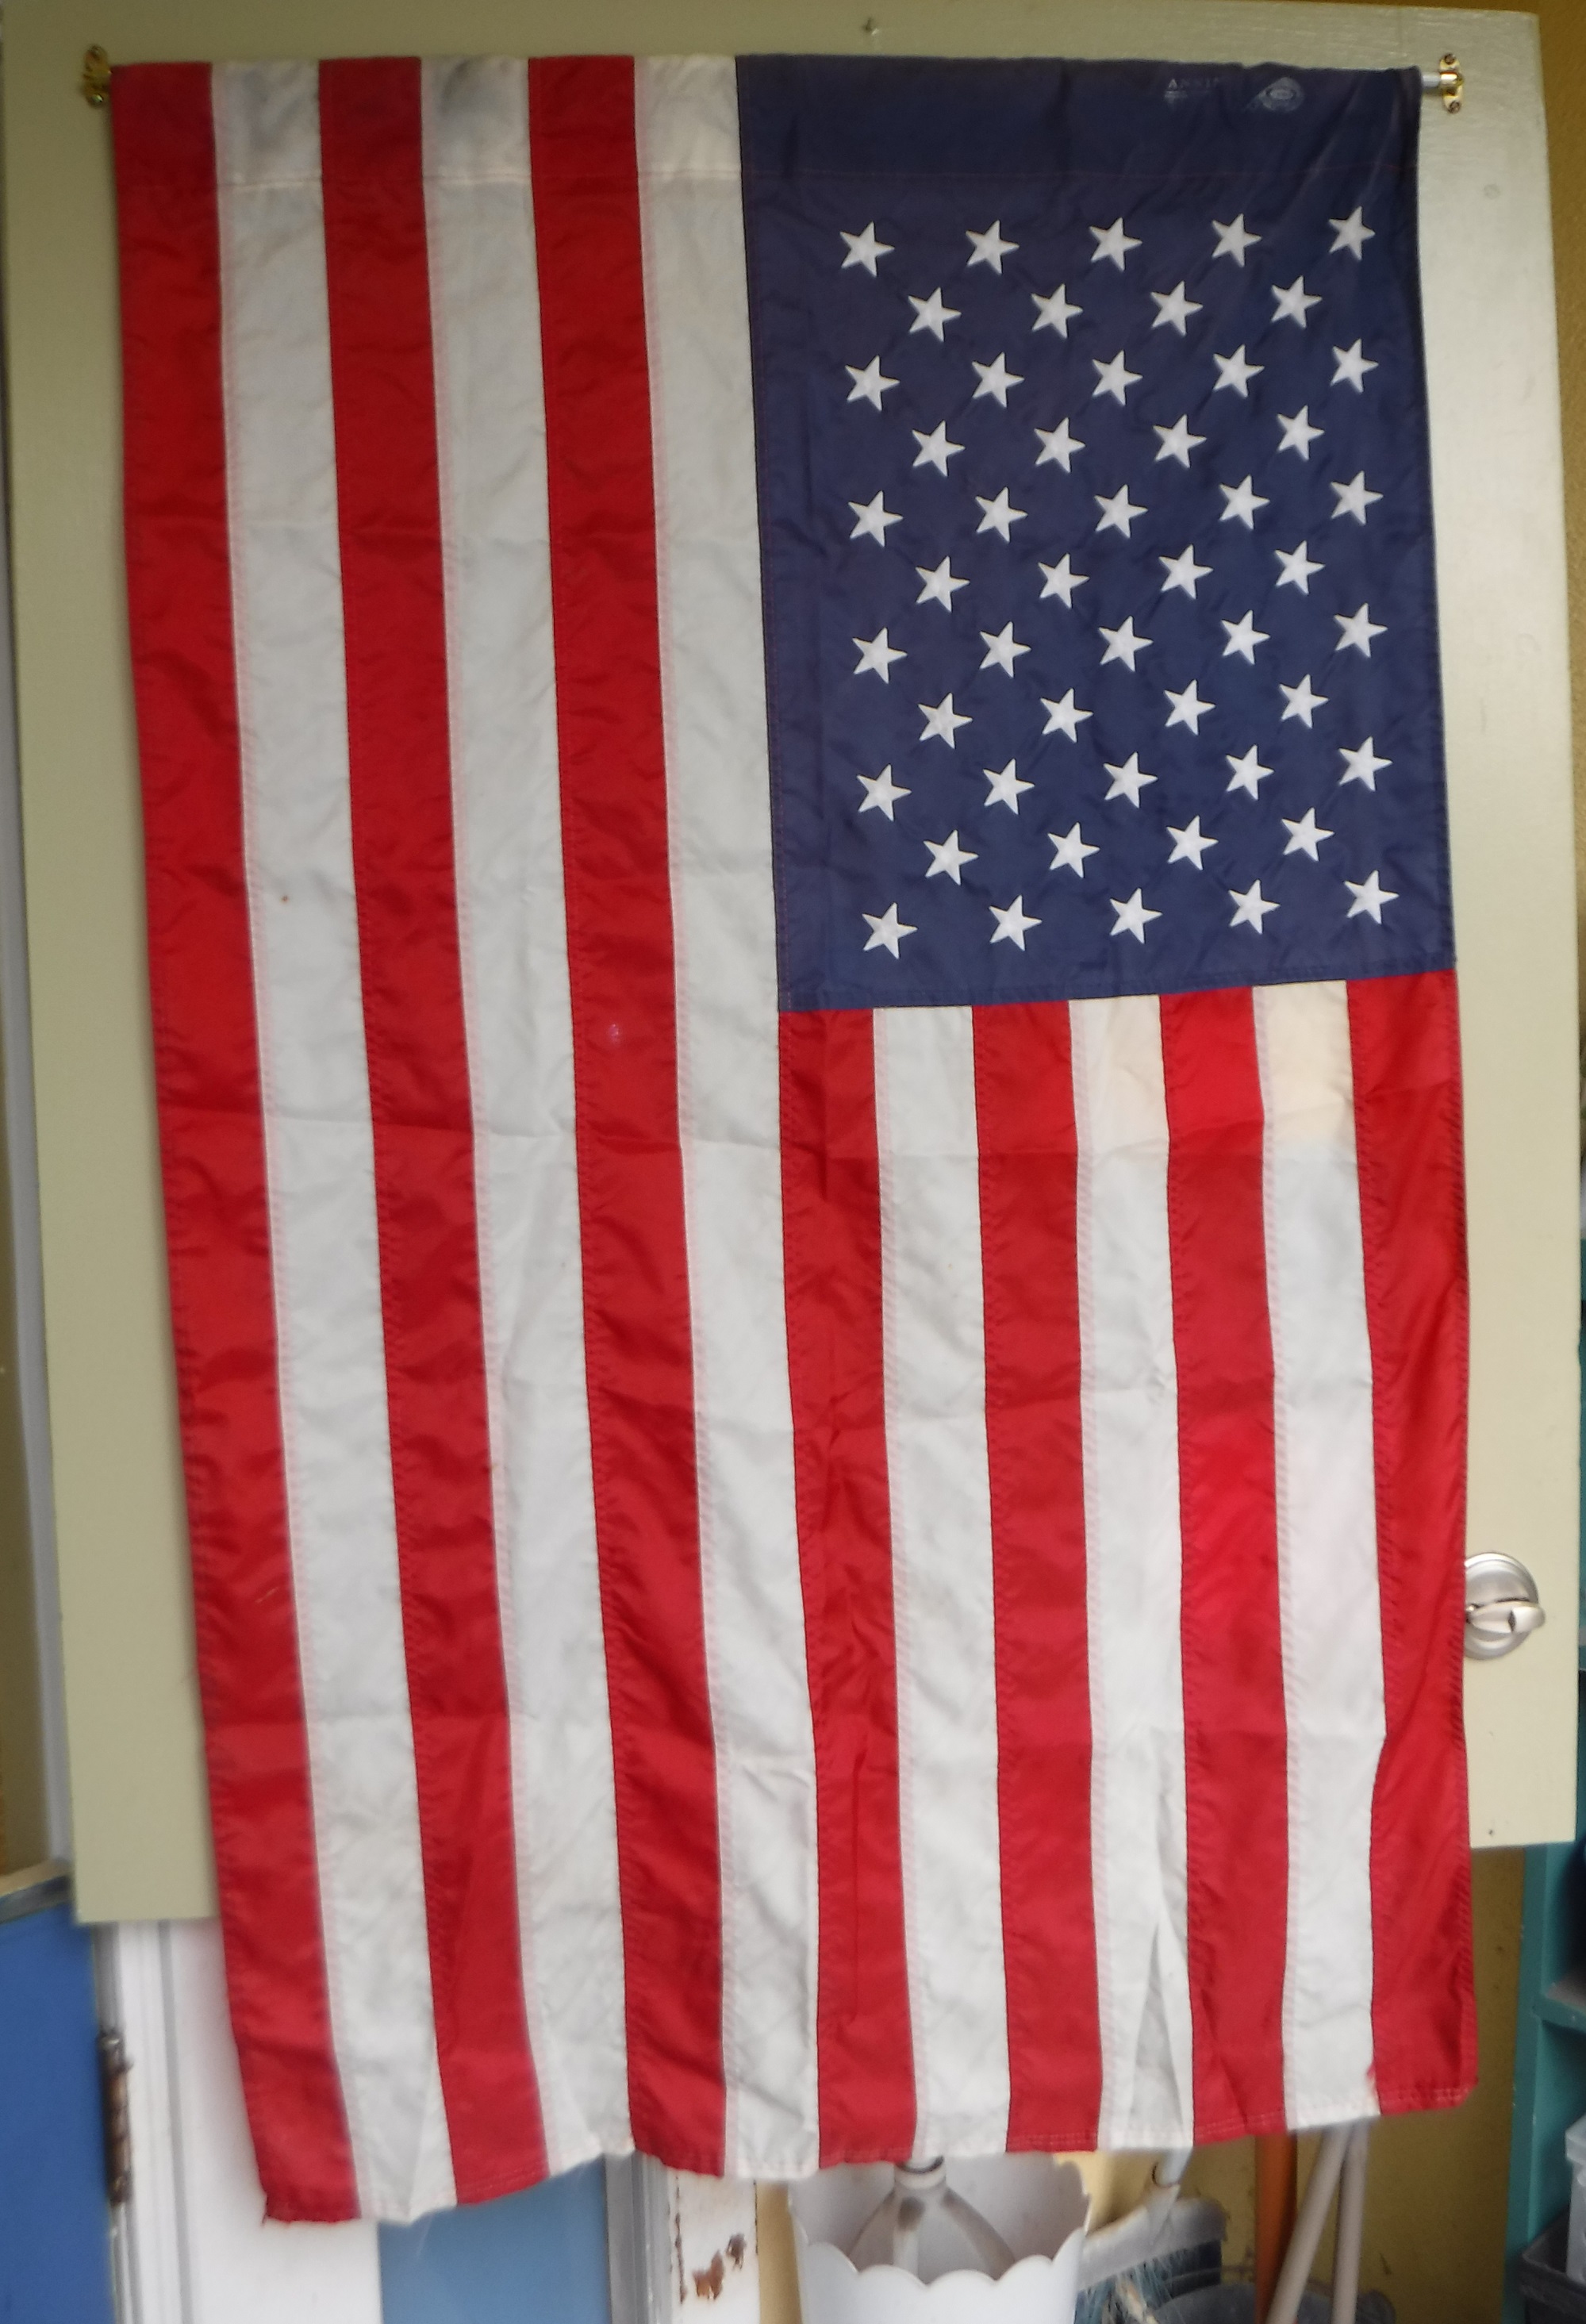 Photo I took of the flag banner hanging on the door at work